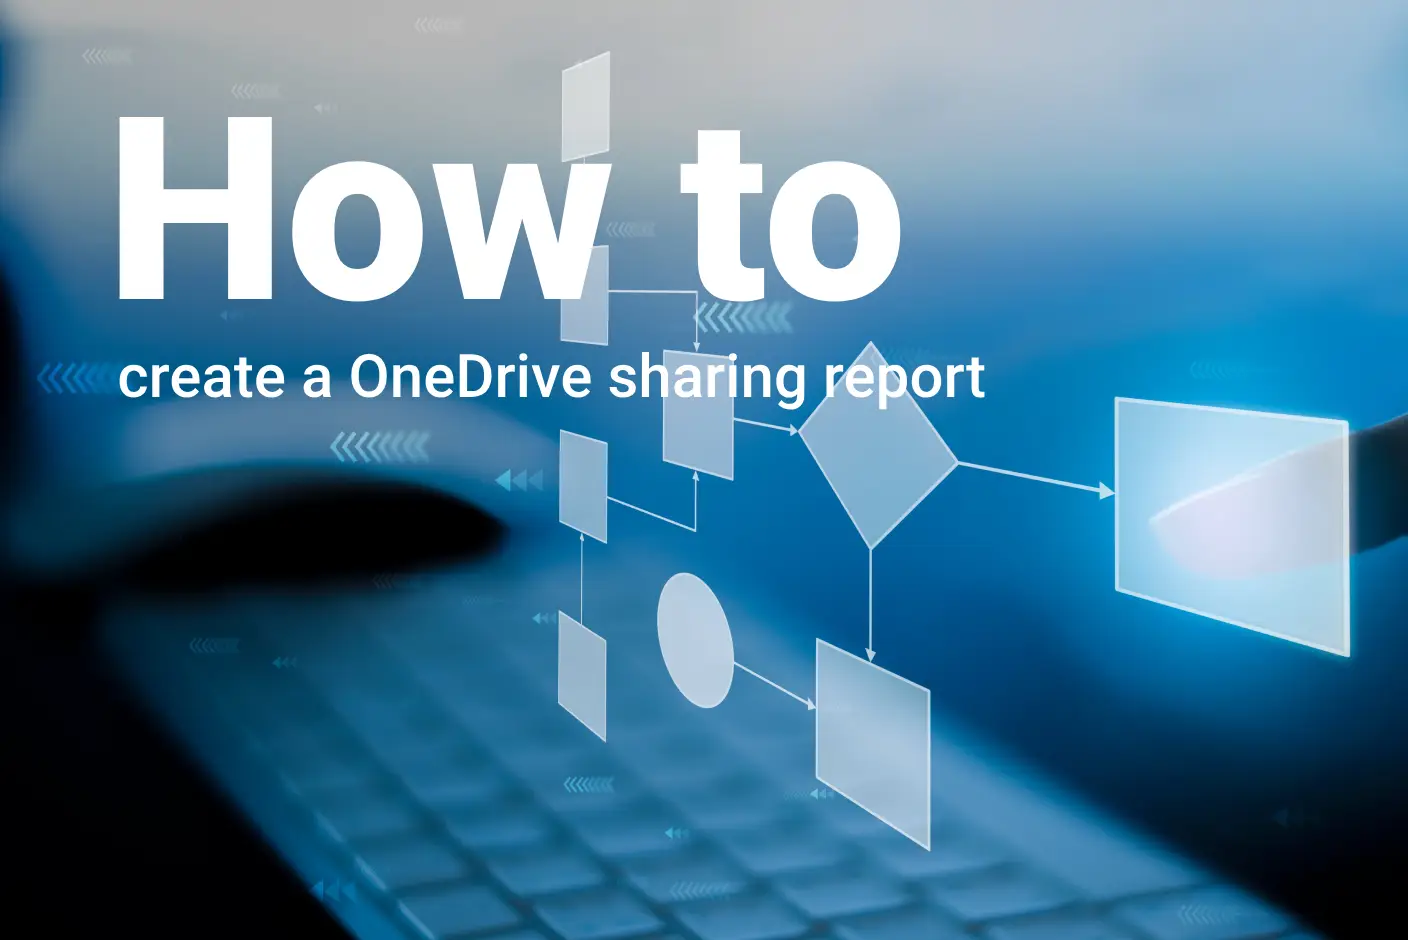 How to create a OneDrive sharing report for all users